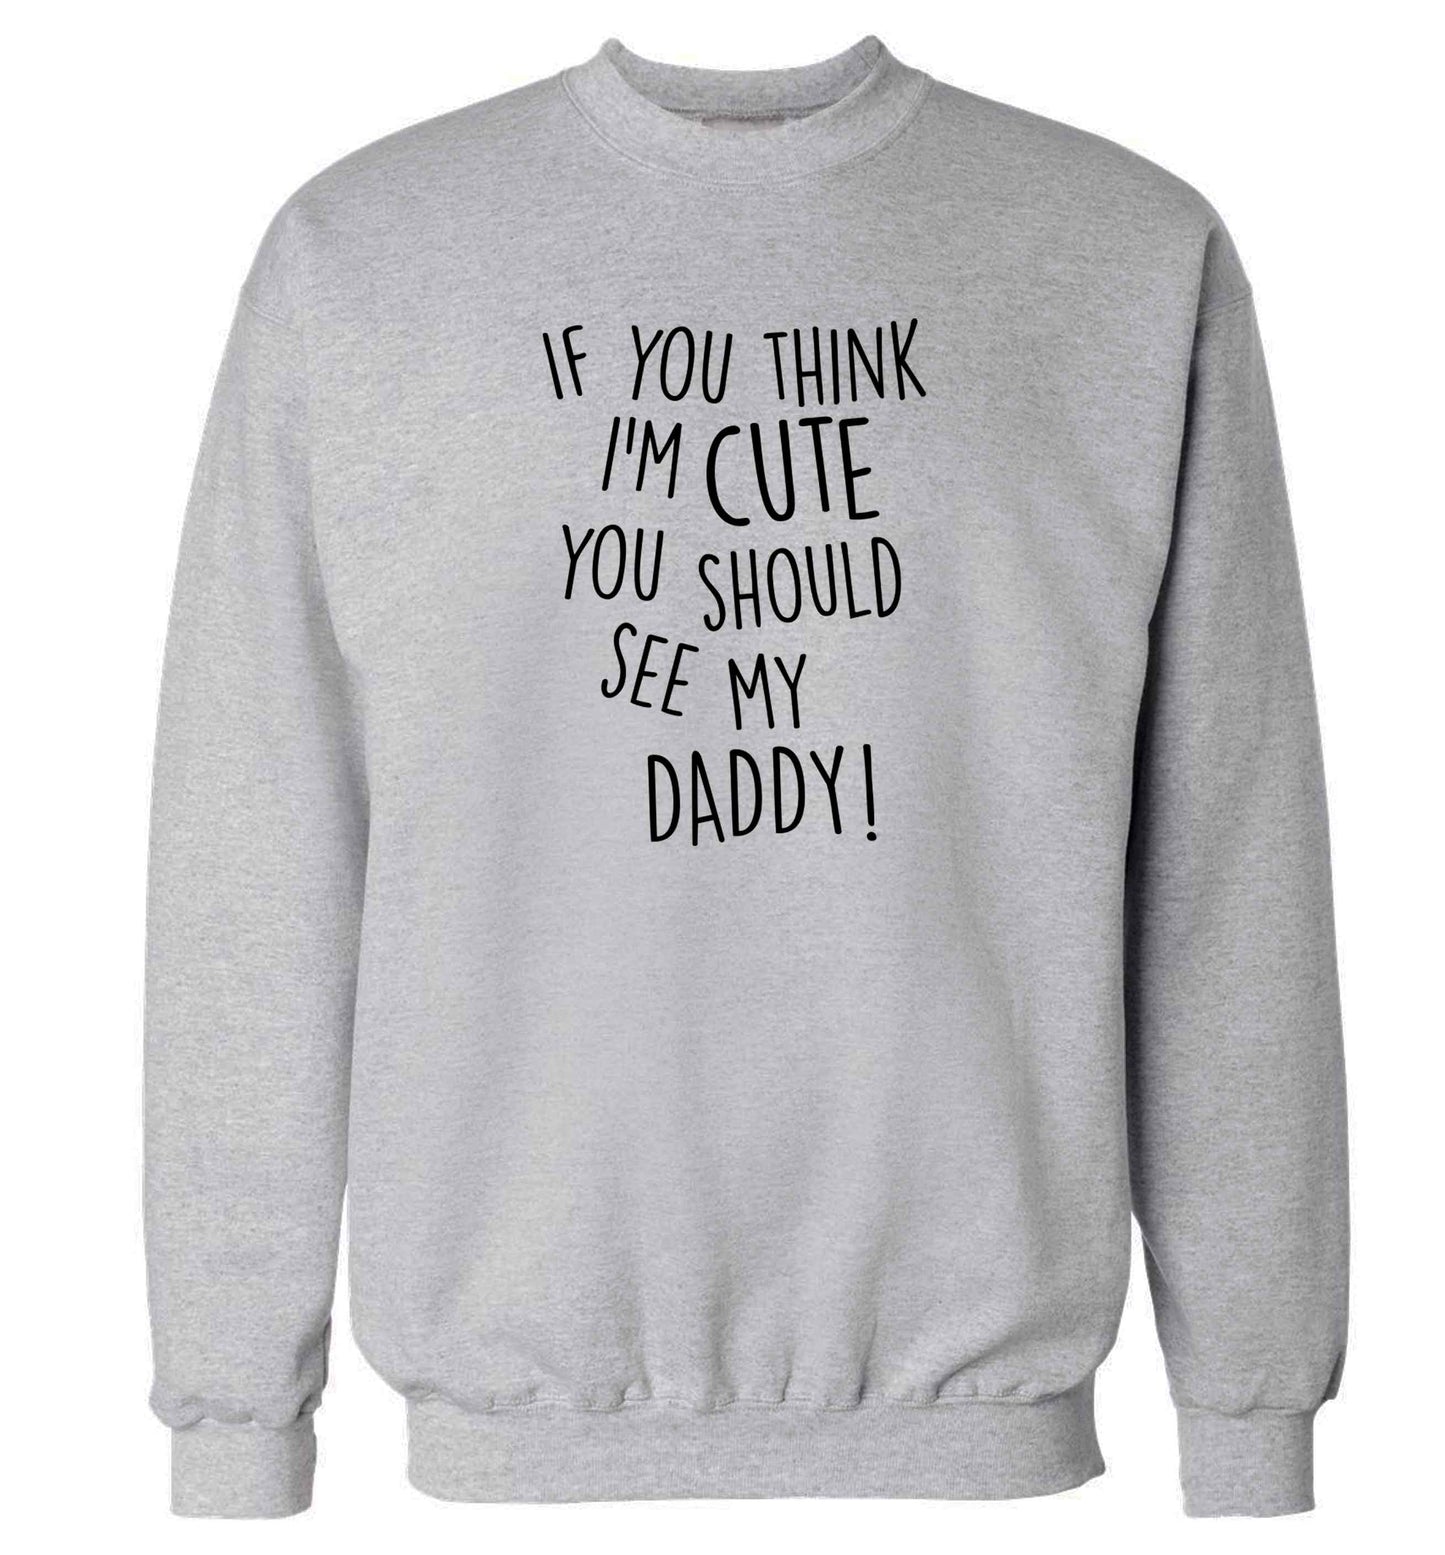 If you think I'm cute you should see my daddy adult's unisex grey sweater 2XL